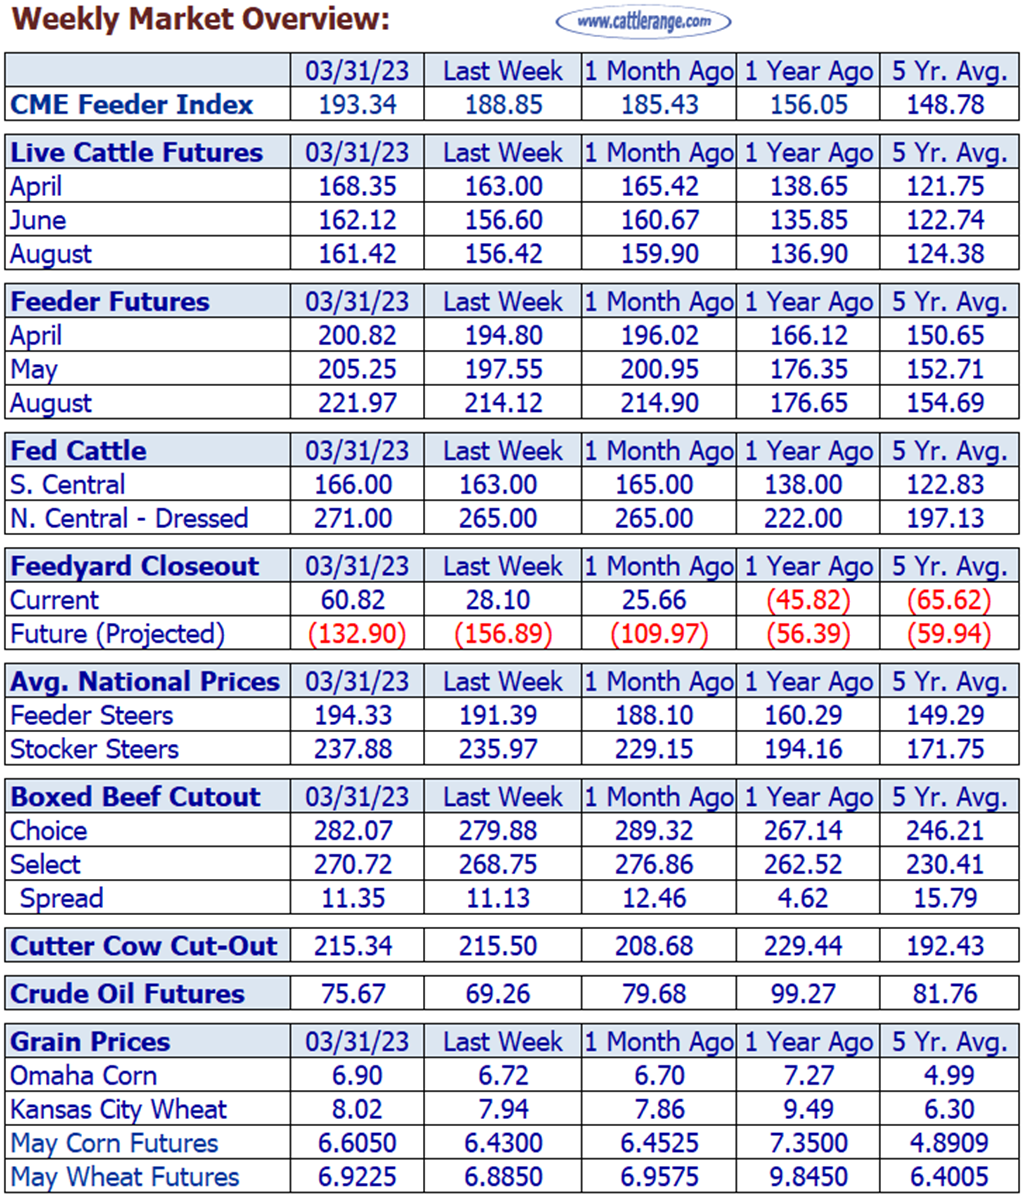 Weekly Cattle Market Overview for Week Ending 3/31/23